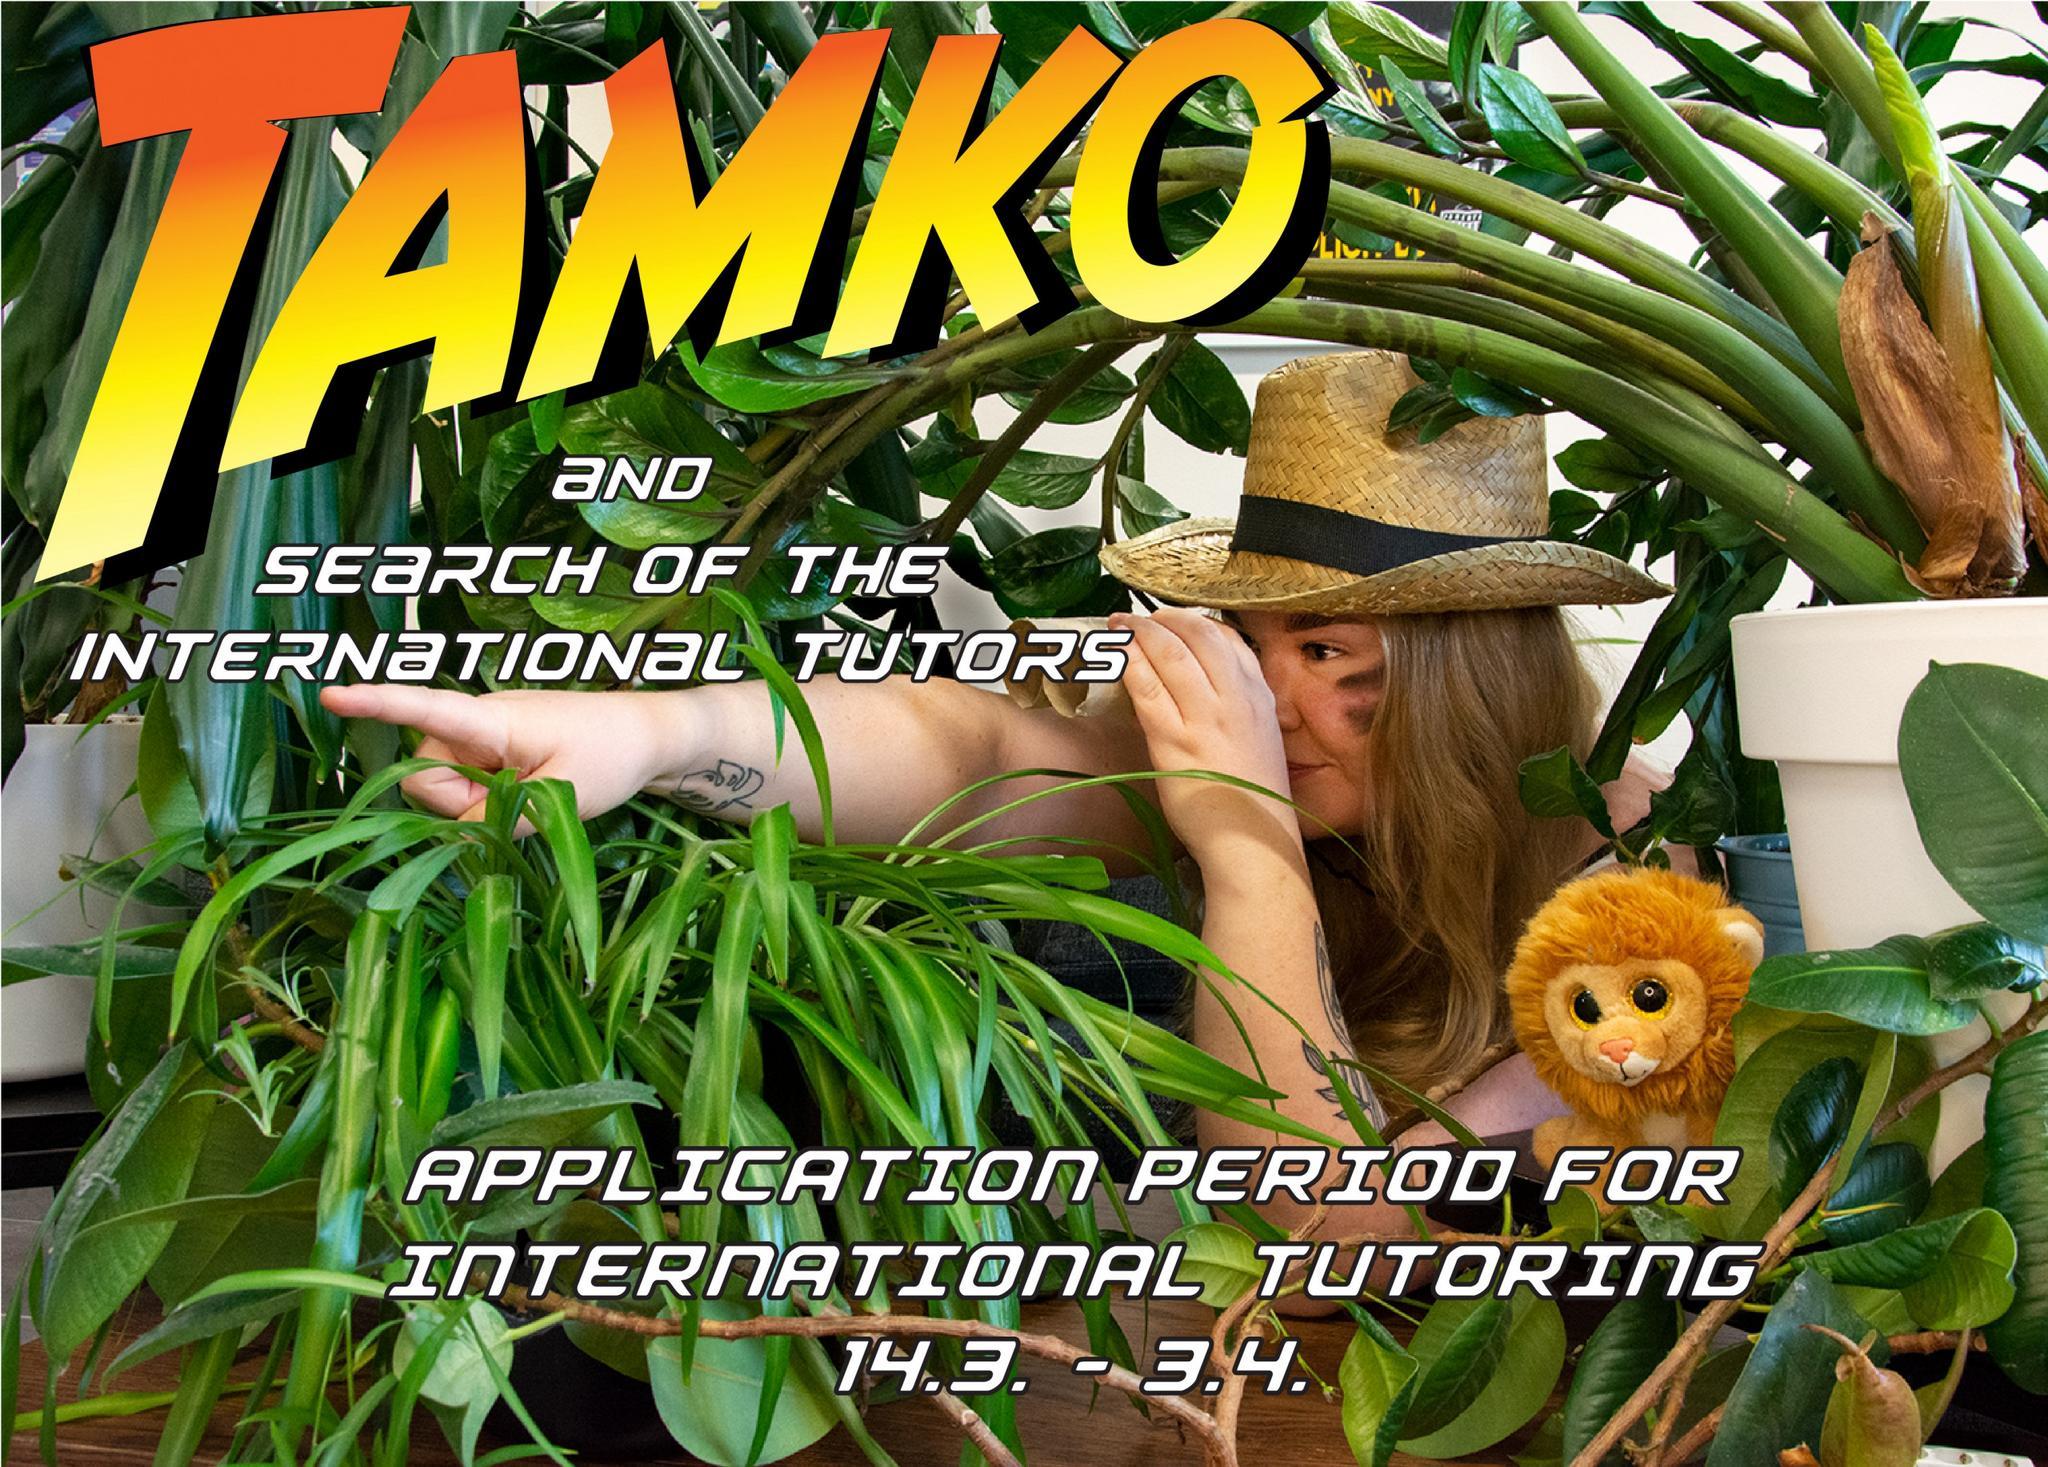 Tamko and search of the international tutors!